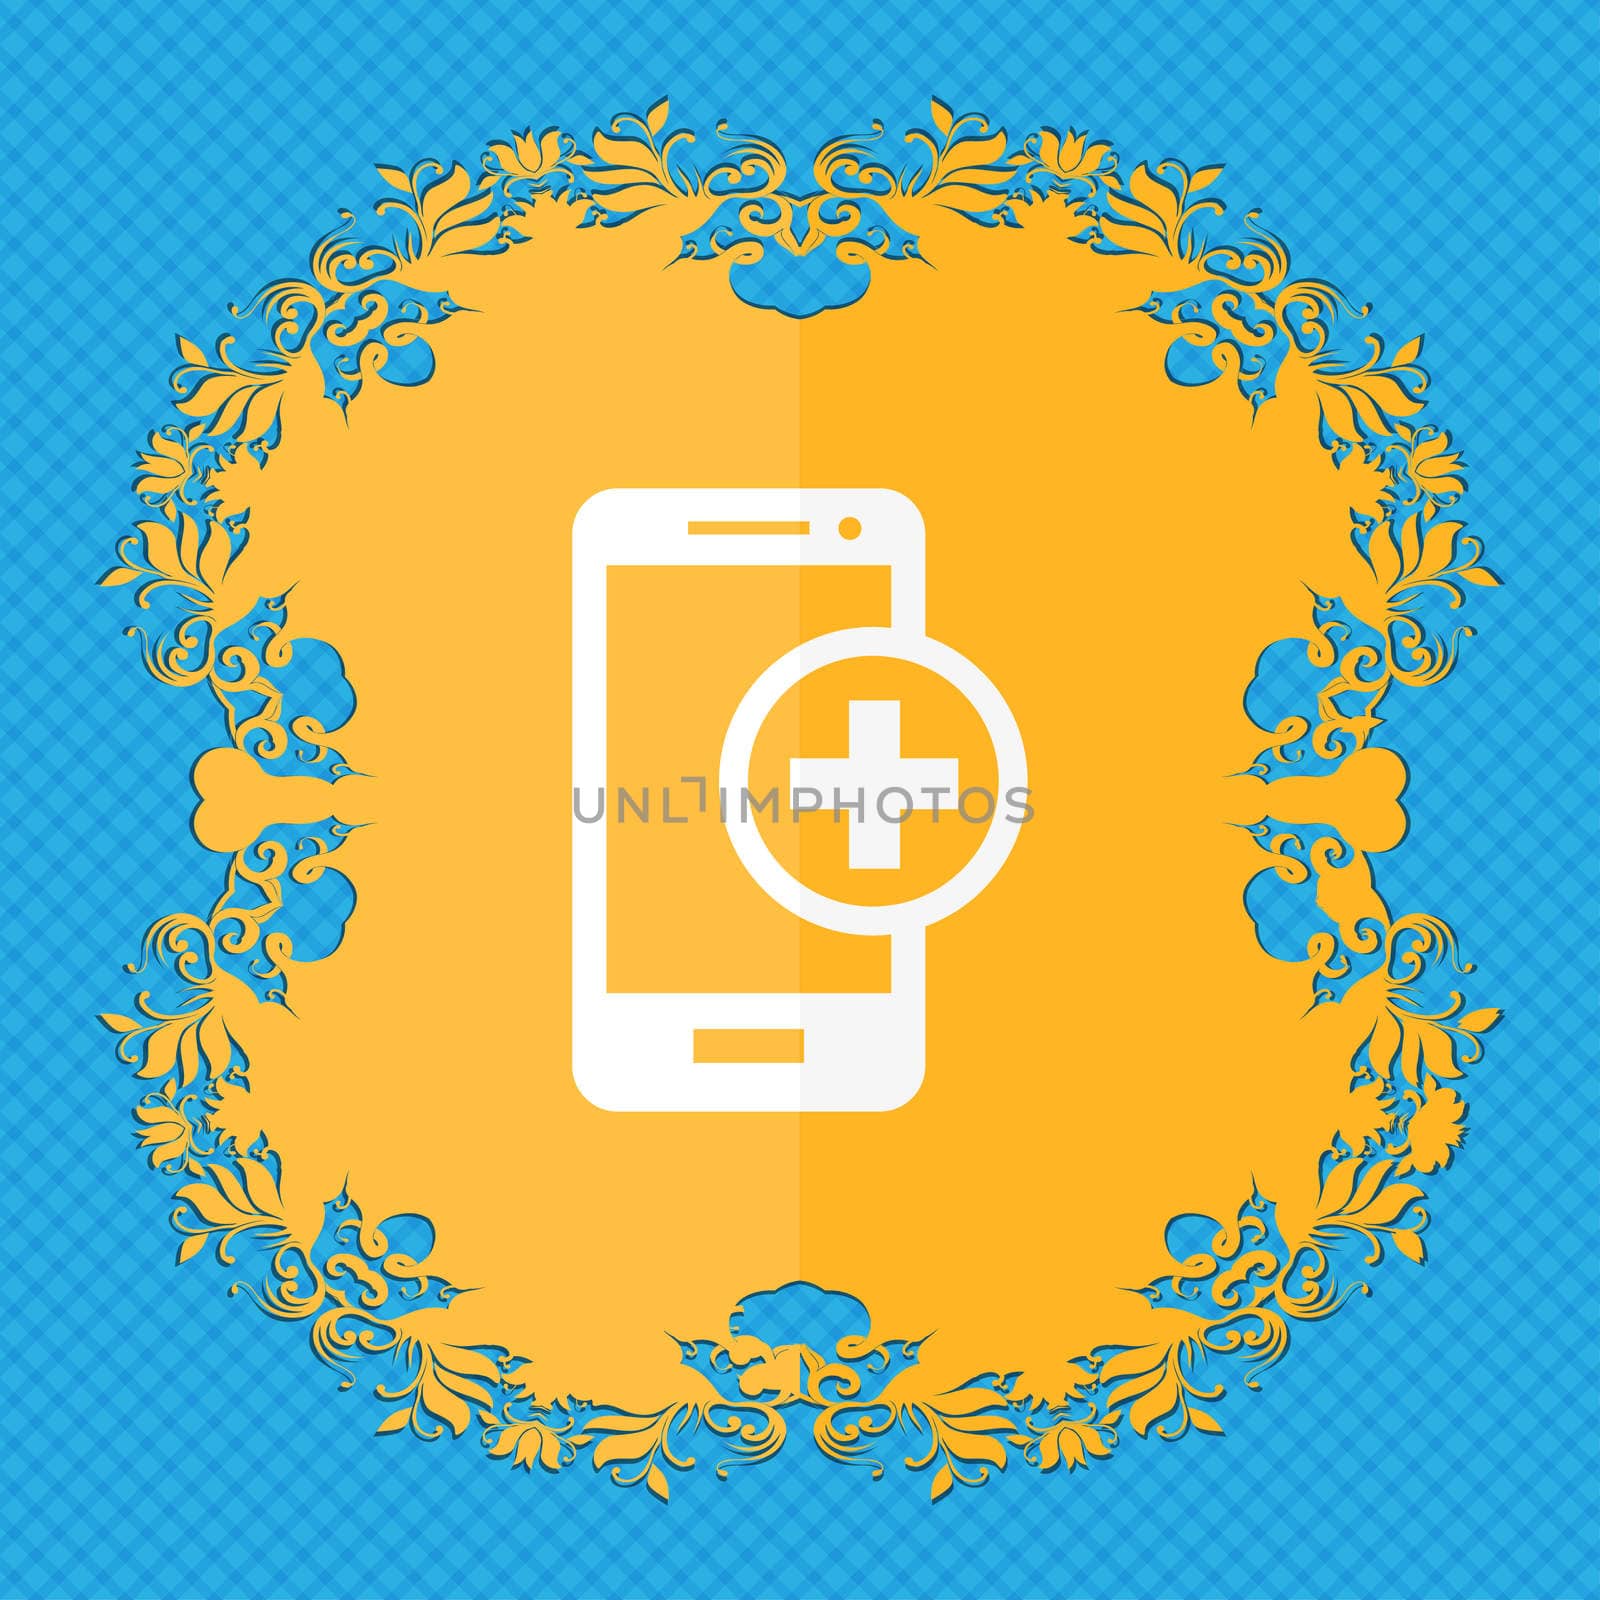 Mobile devices sign icon. with symbol plus. Floral flat design on a blue abstract background with place for your text. illustration